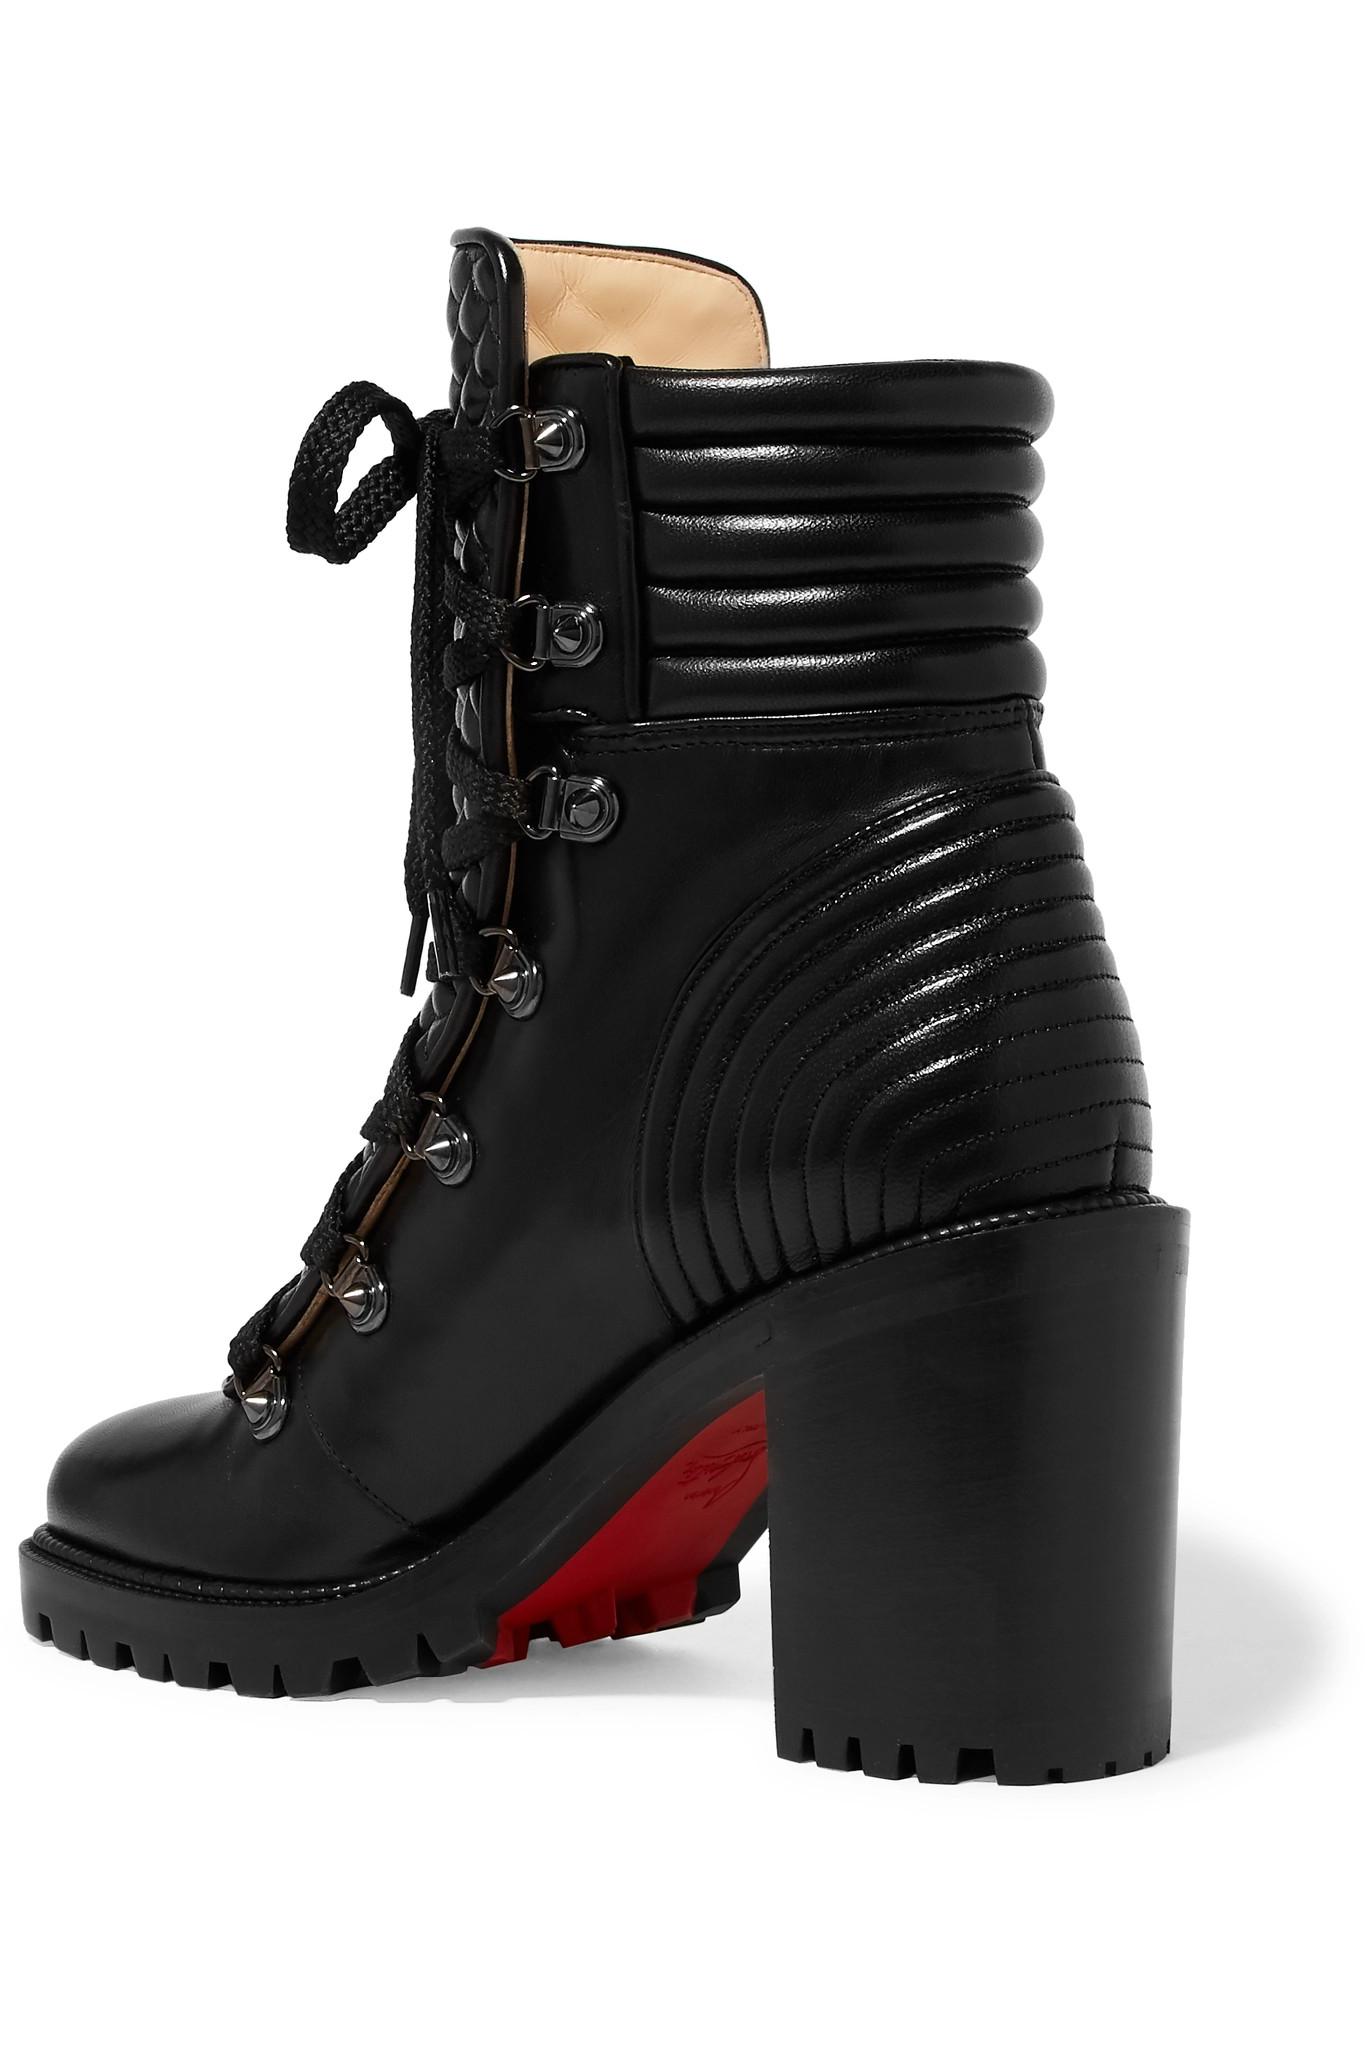 Christian Louboutin Mad 70 Spiked Quilted Leather Ankle Boots in Black |